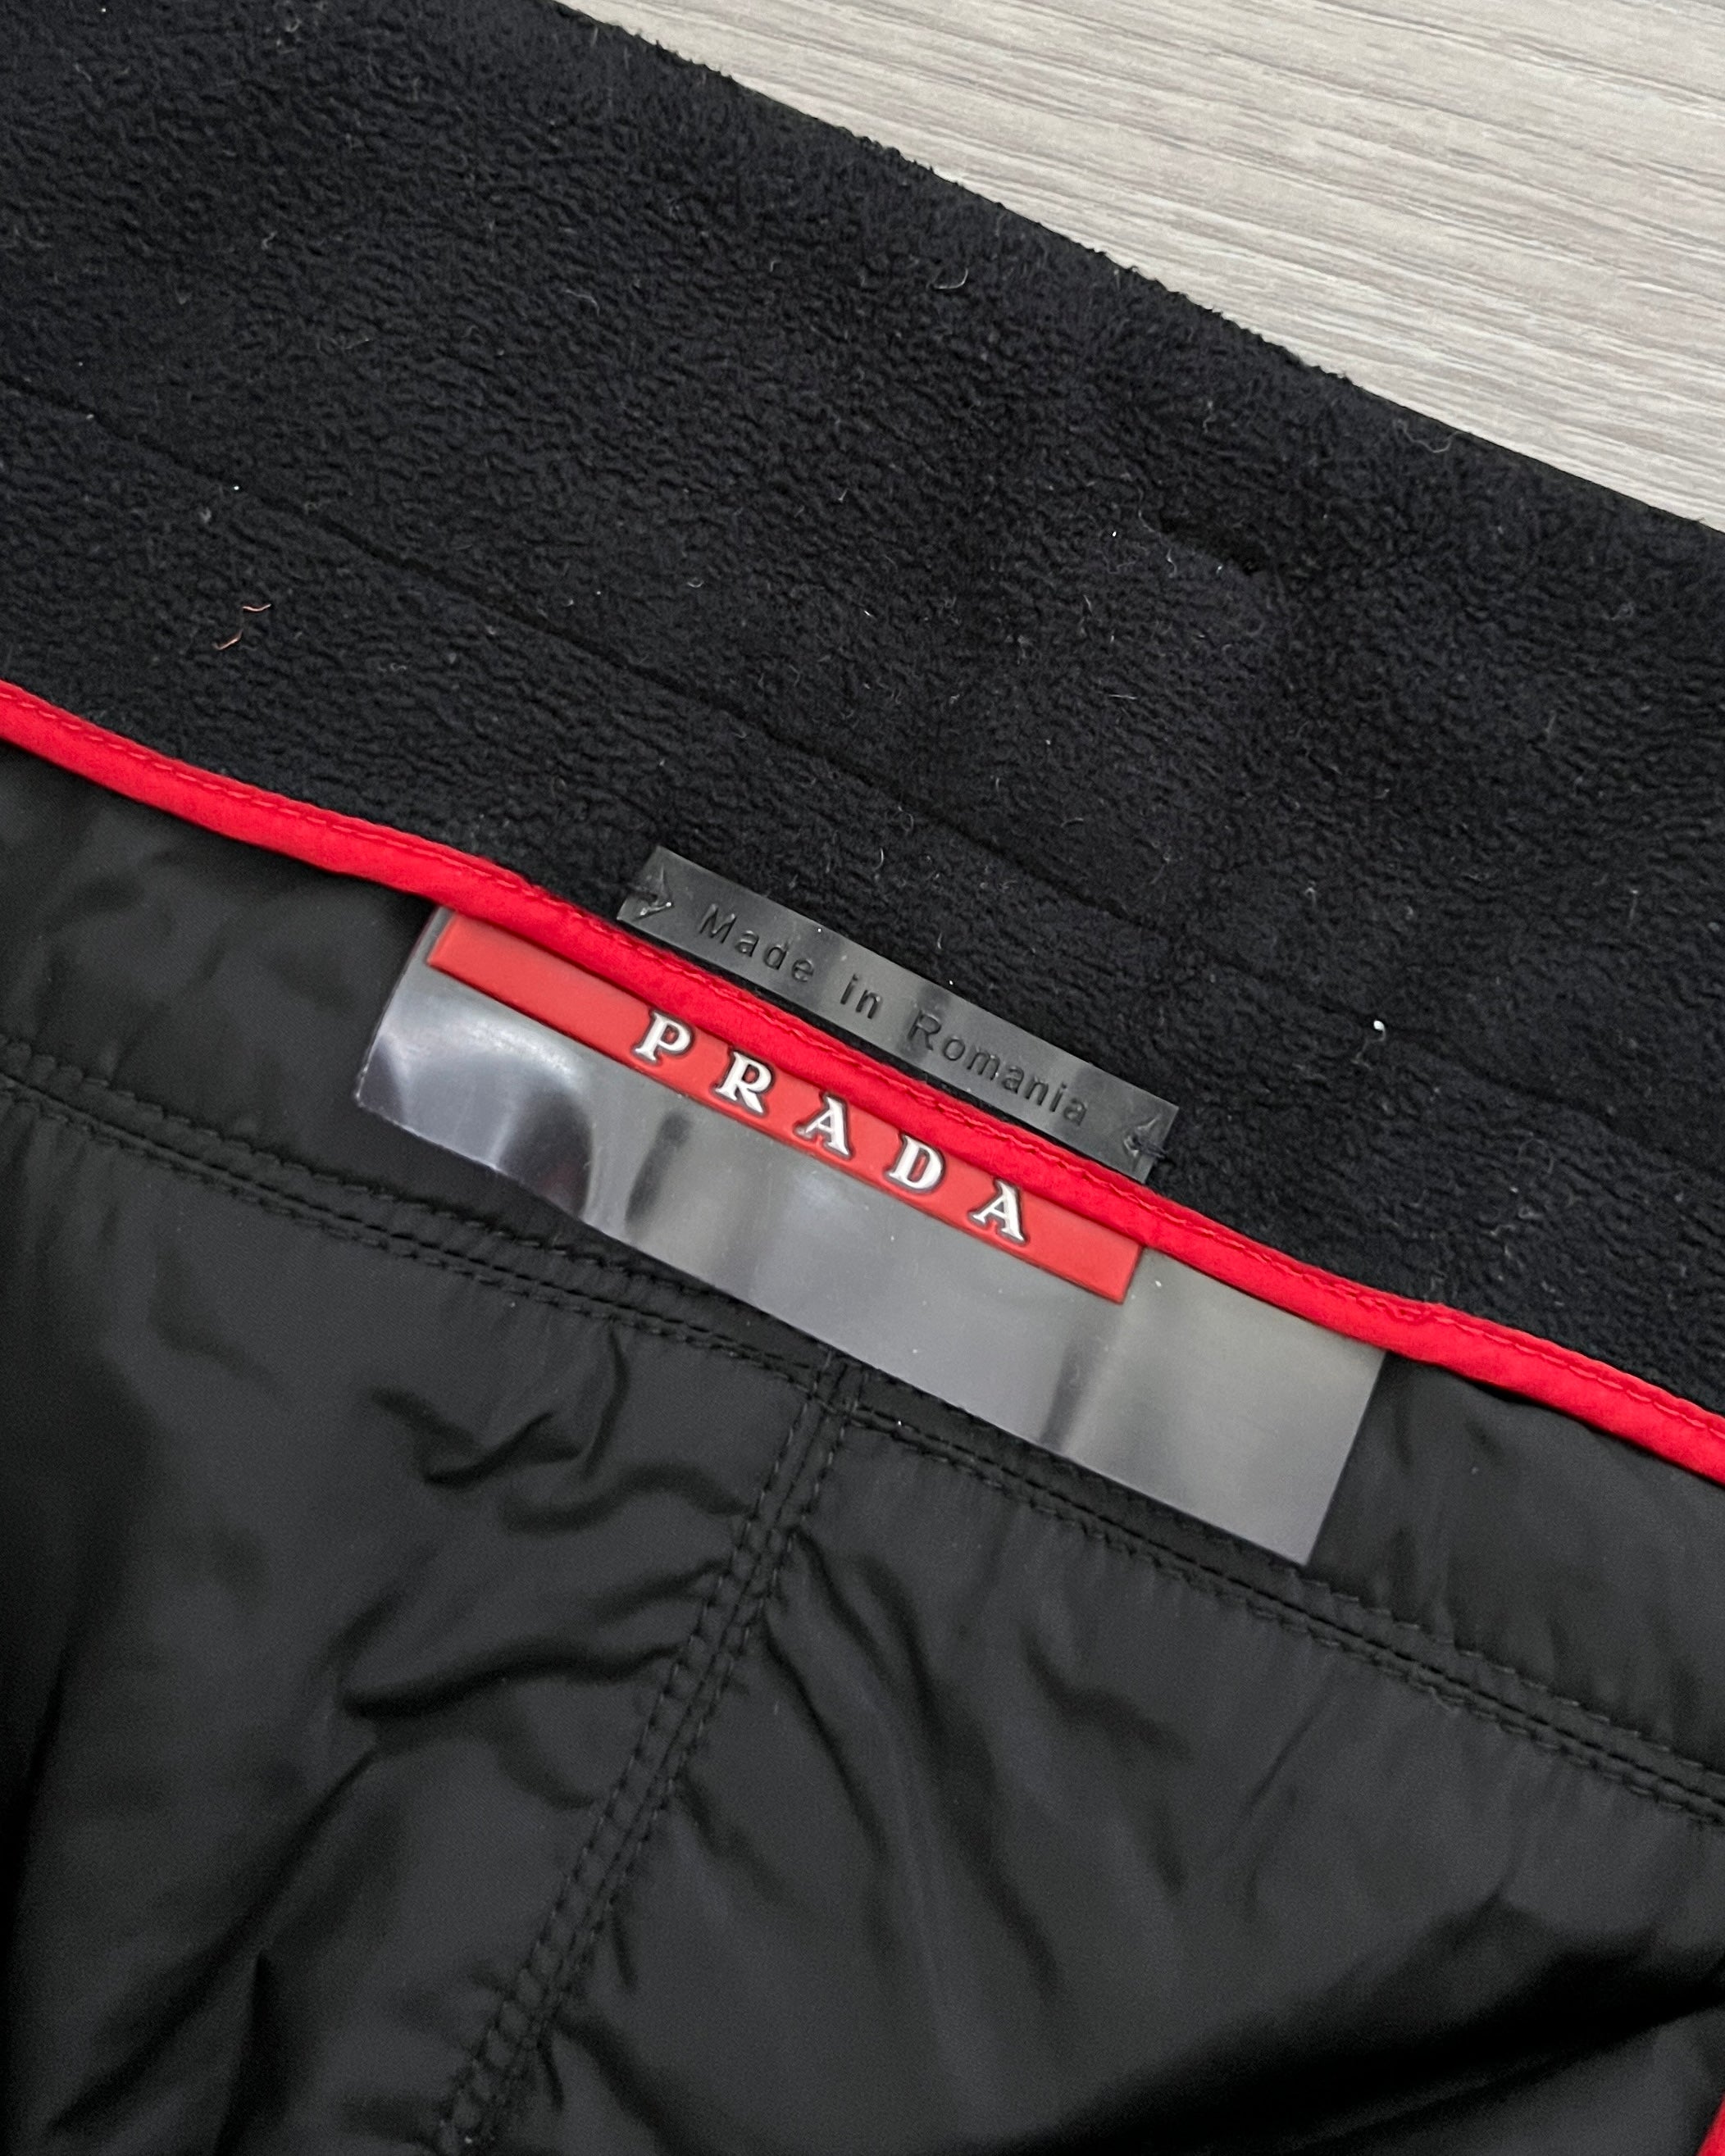 Prada Sport 00s Technical Gore-Tex Belted Insulated Pants - Size 